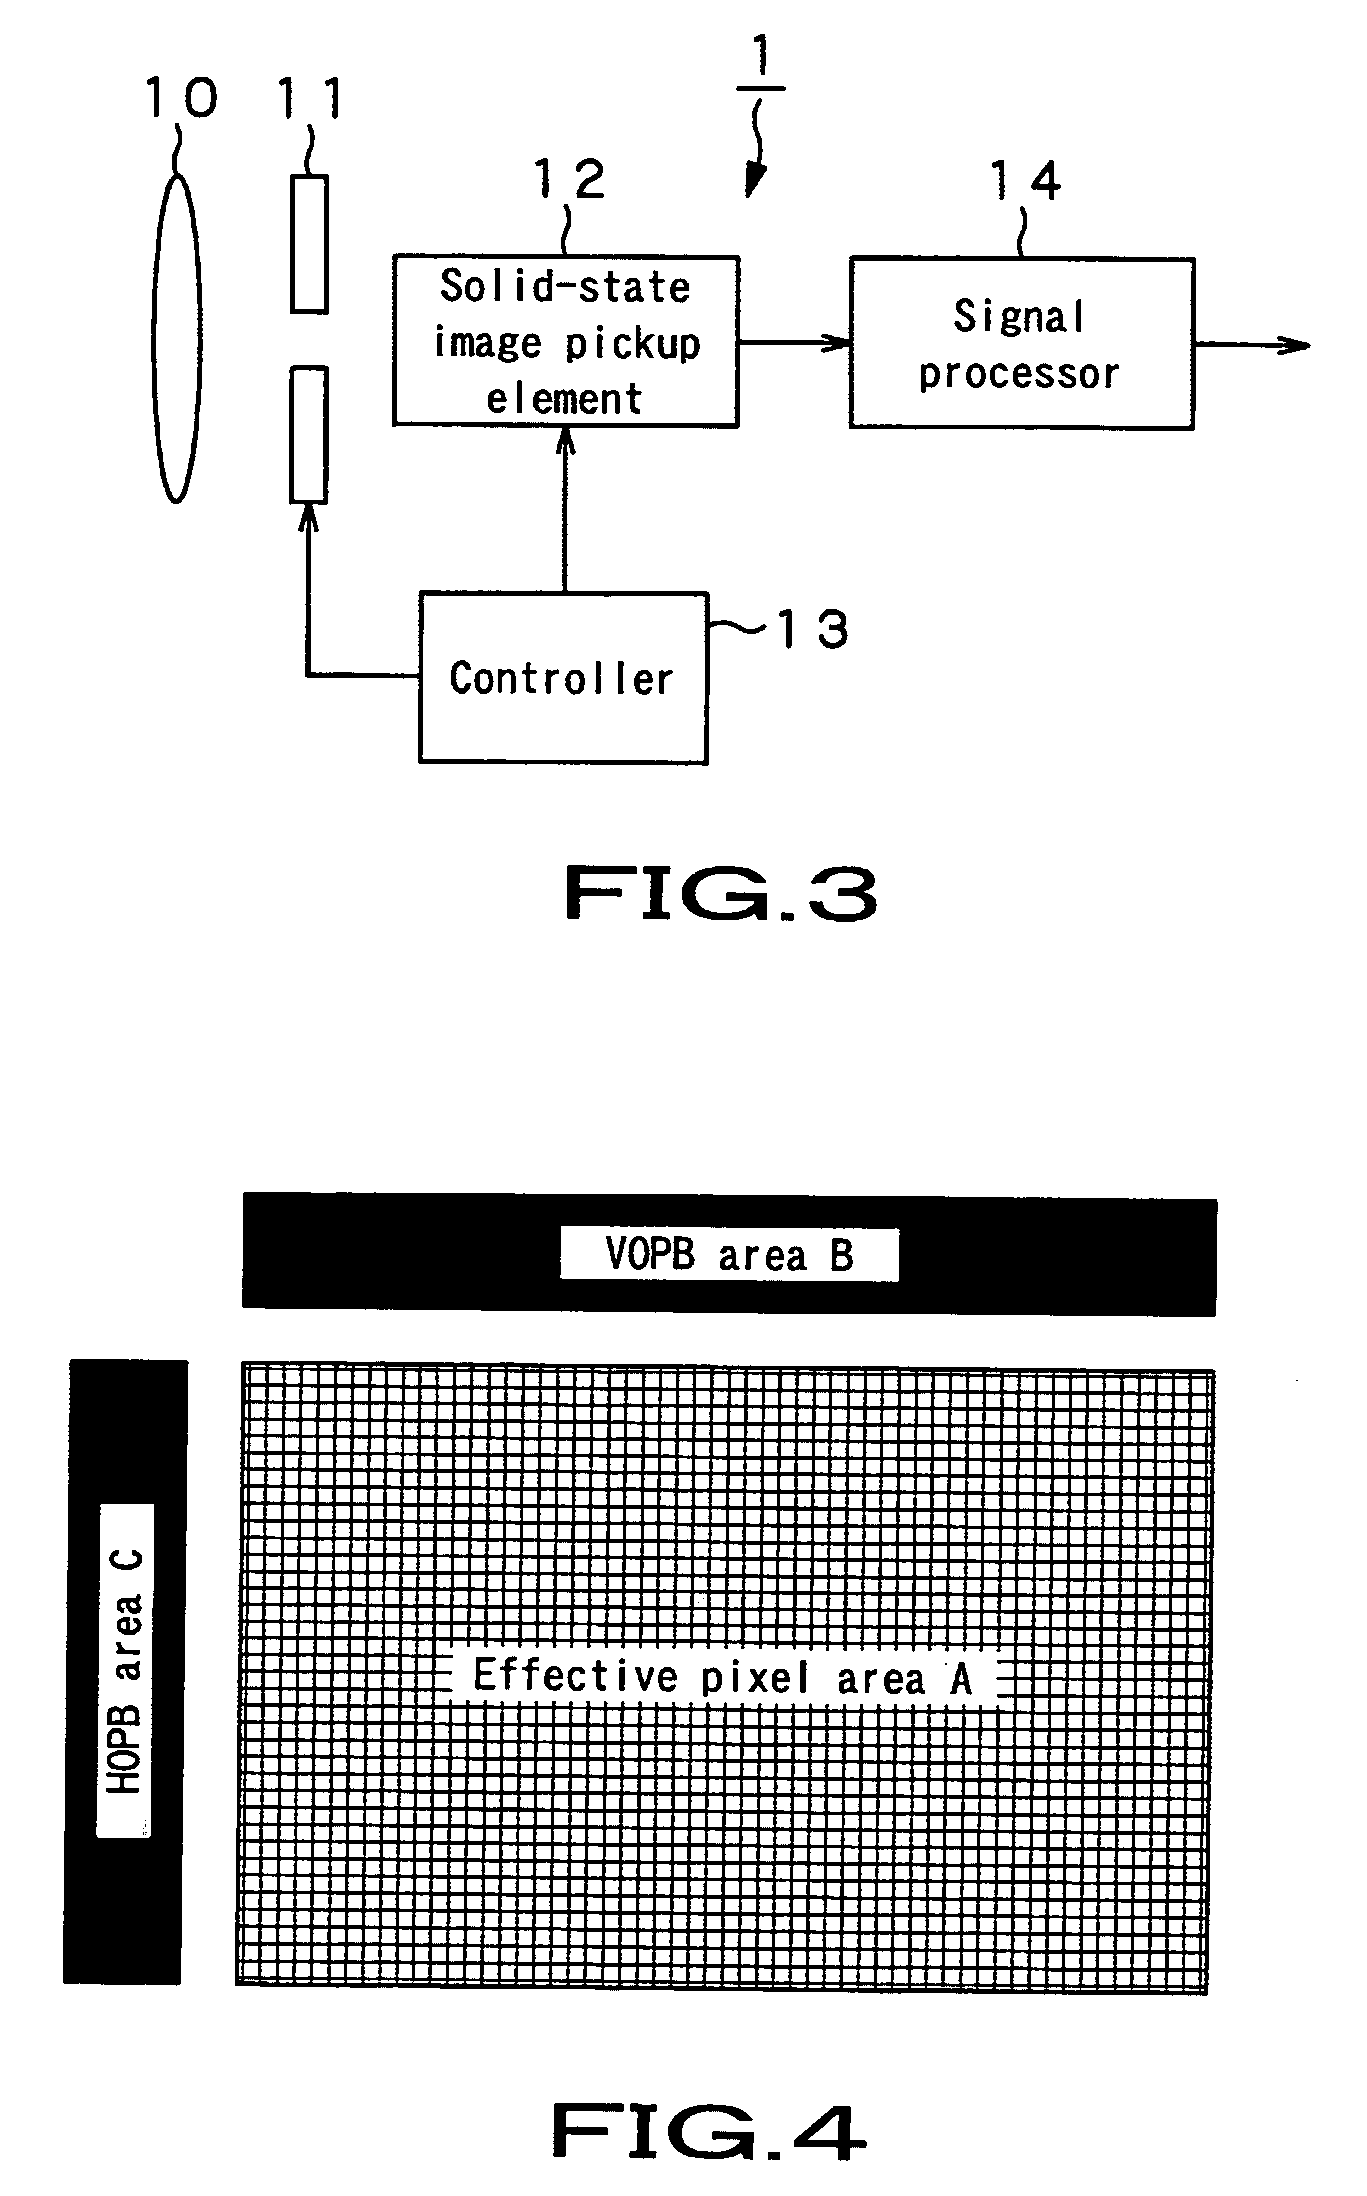 Signal processing device and method for reducing influence on column noise detection from defective pixels